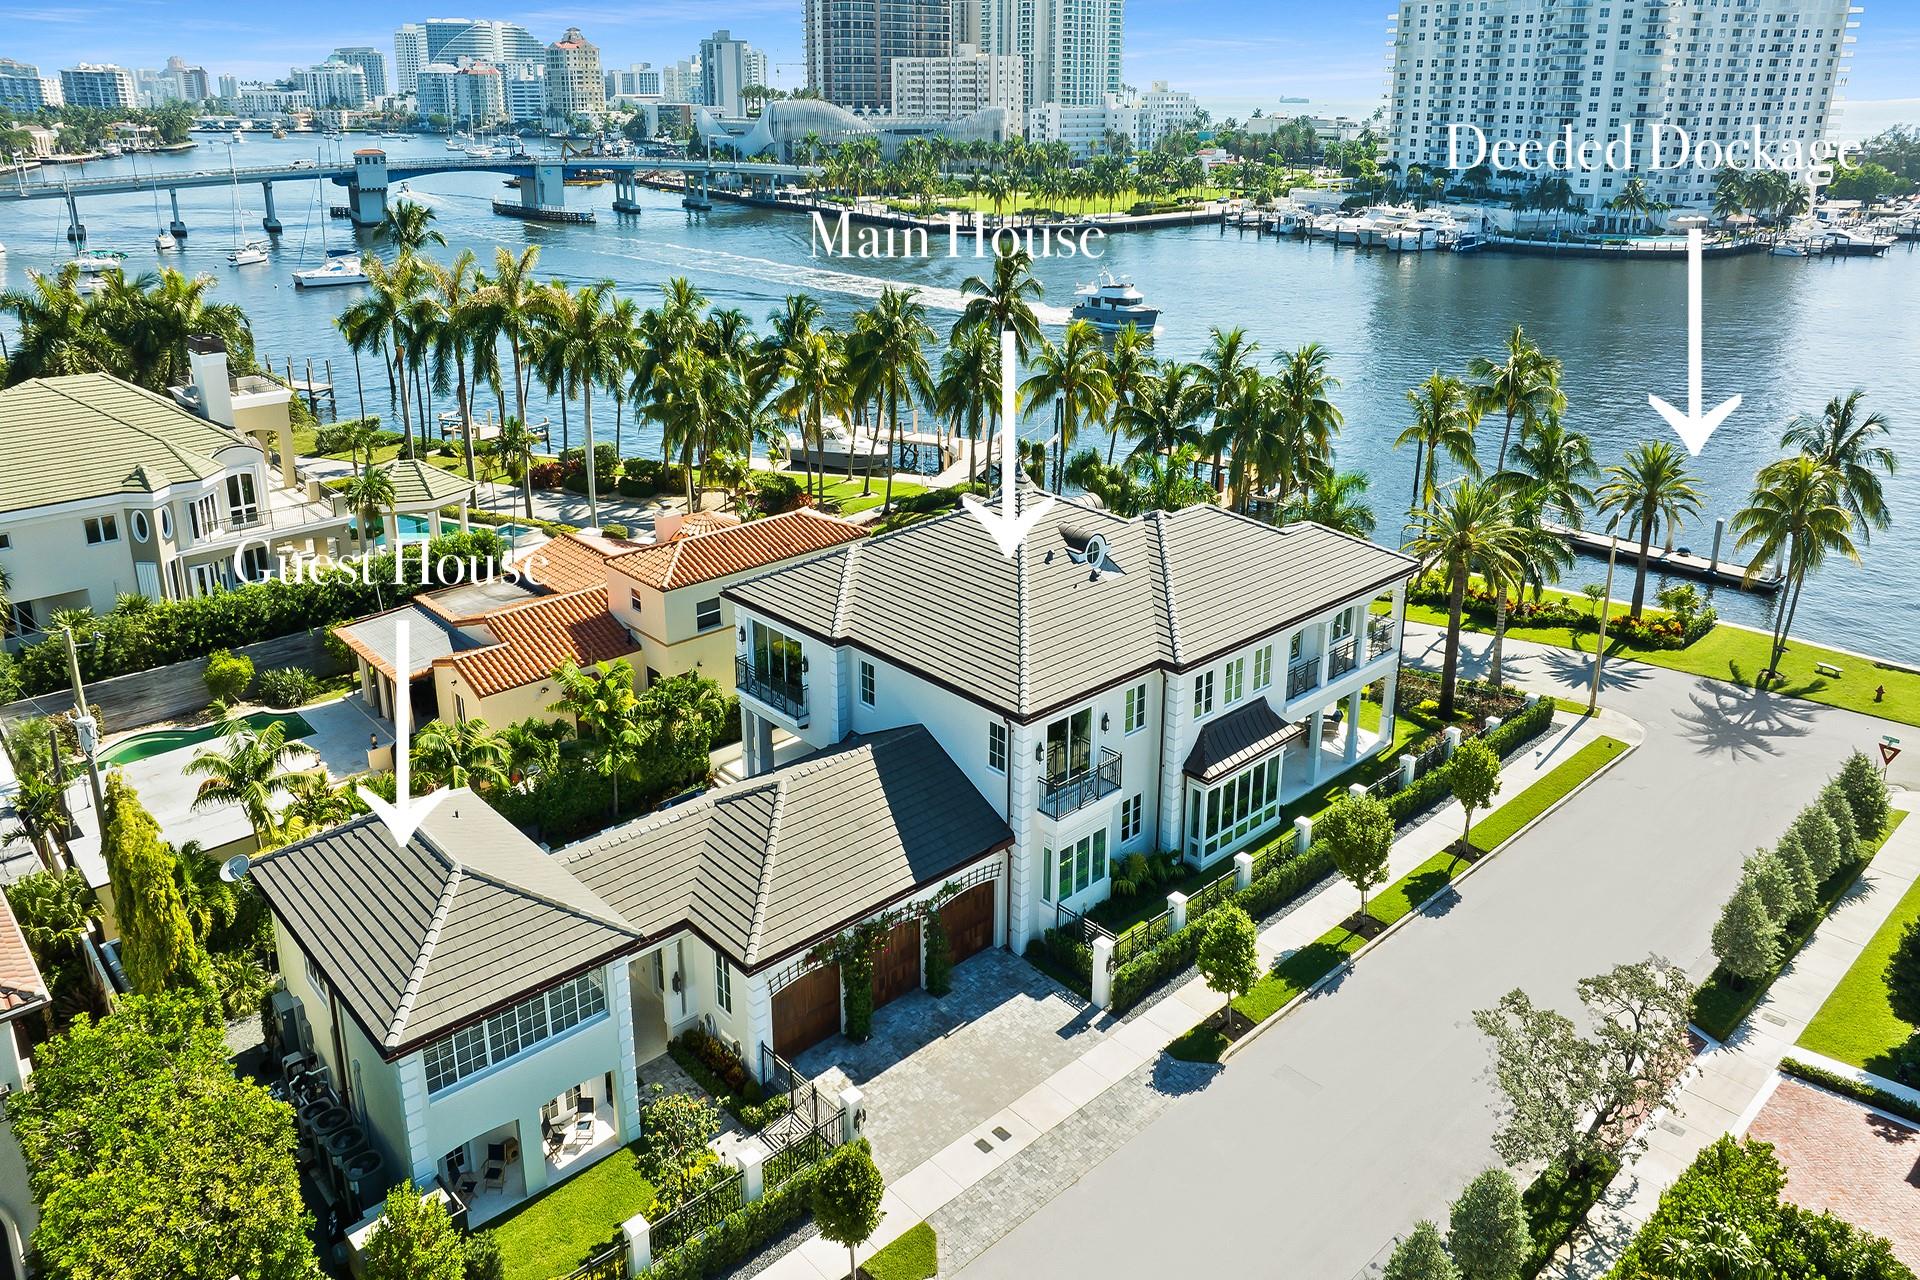 2022 Intracoastal Custom New Construction w/deeded dockage for multiple boats & semi-attached versatile guest house offering endless possibilities to cater to your lifestyle. Experience the ultimate in waterfront luxury that showcases spectacular spanning ever-changing intracoastal views, ensuring no view is ever the same!Adorned for its beauty this contemporary-coastal inspired residence is designed w/luxurious influences & superior craftsmanship, seamlessly customizing indoor/outdoor space w/functionality & pure elegance! Features include; loft, temp controlled wine room, bonus rm, chef&butlers kitchen, elevator, 3 car garage w/rm for lifts, private pool w/summer kitchen. Idlewyld offers its residents; security patrol, video surveillance, no wake zone, direct ocean access,& walkability.